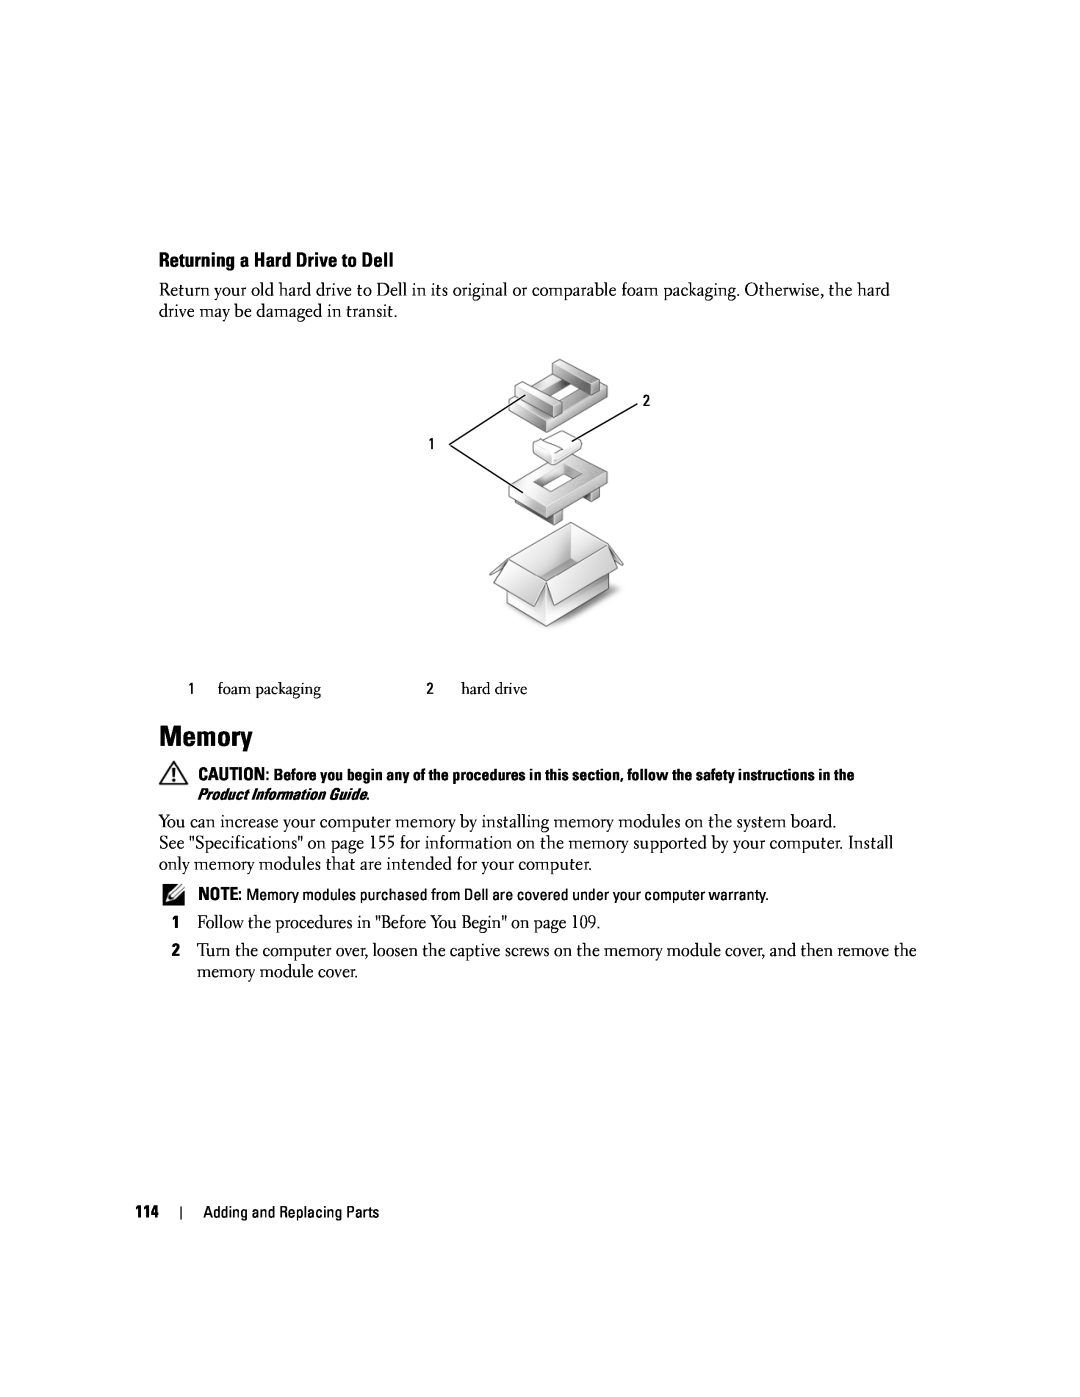 Dell PP20L owner manual Memory, Returning a Hard Drive to Dell 